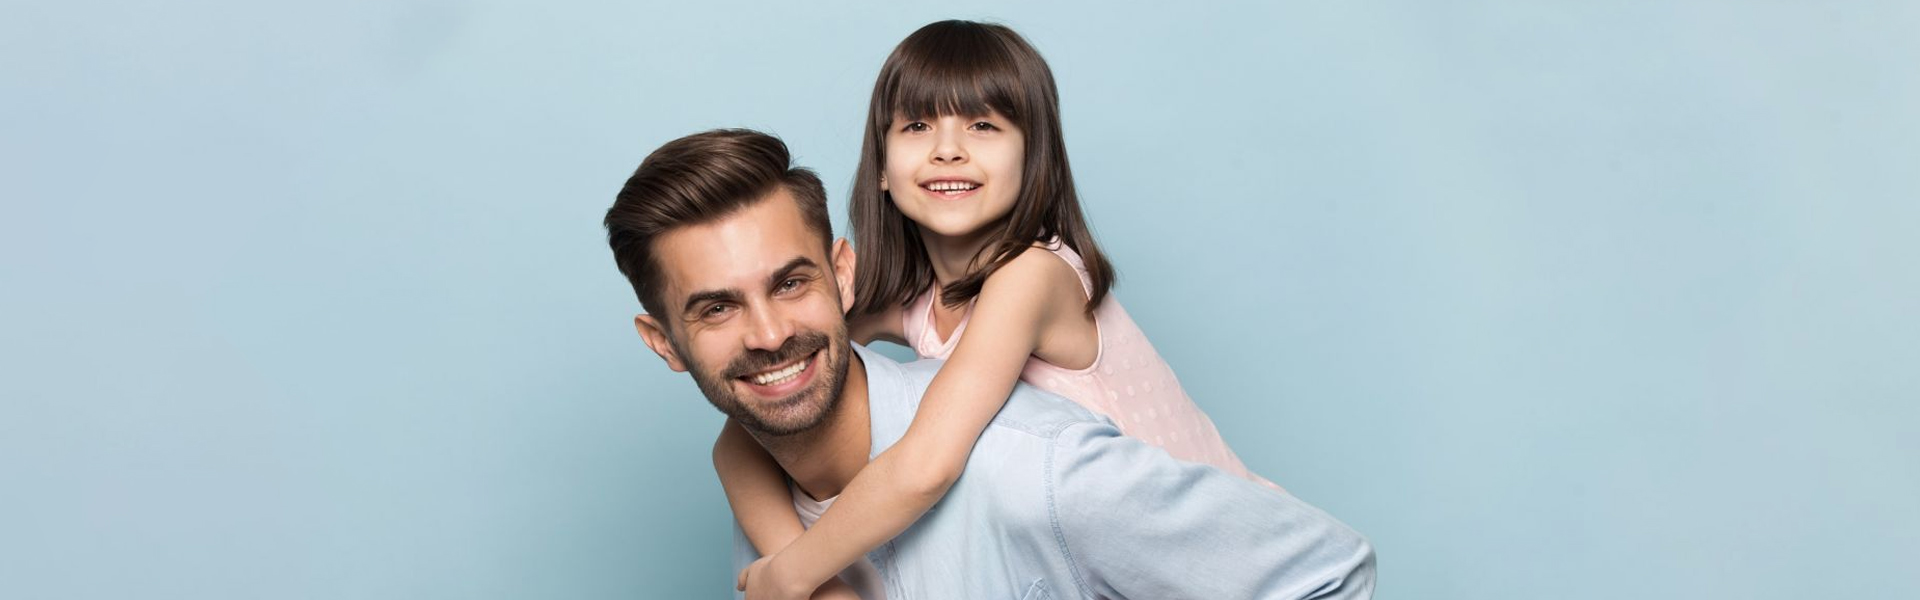 teeth bonding for smile makeovers on fathers day